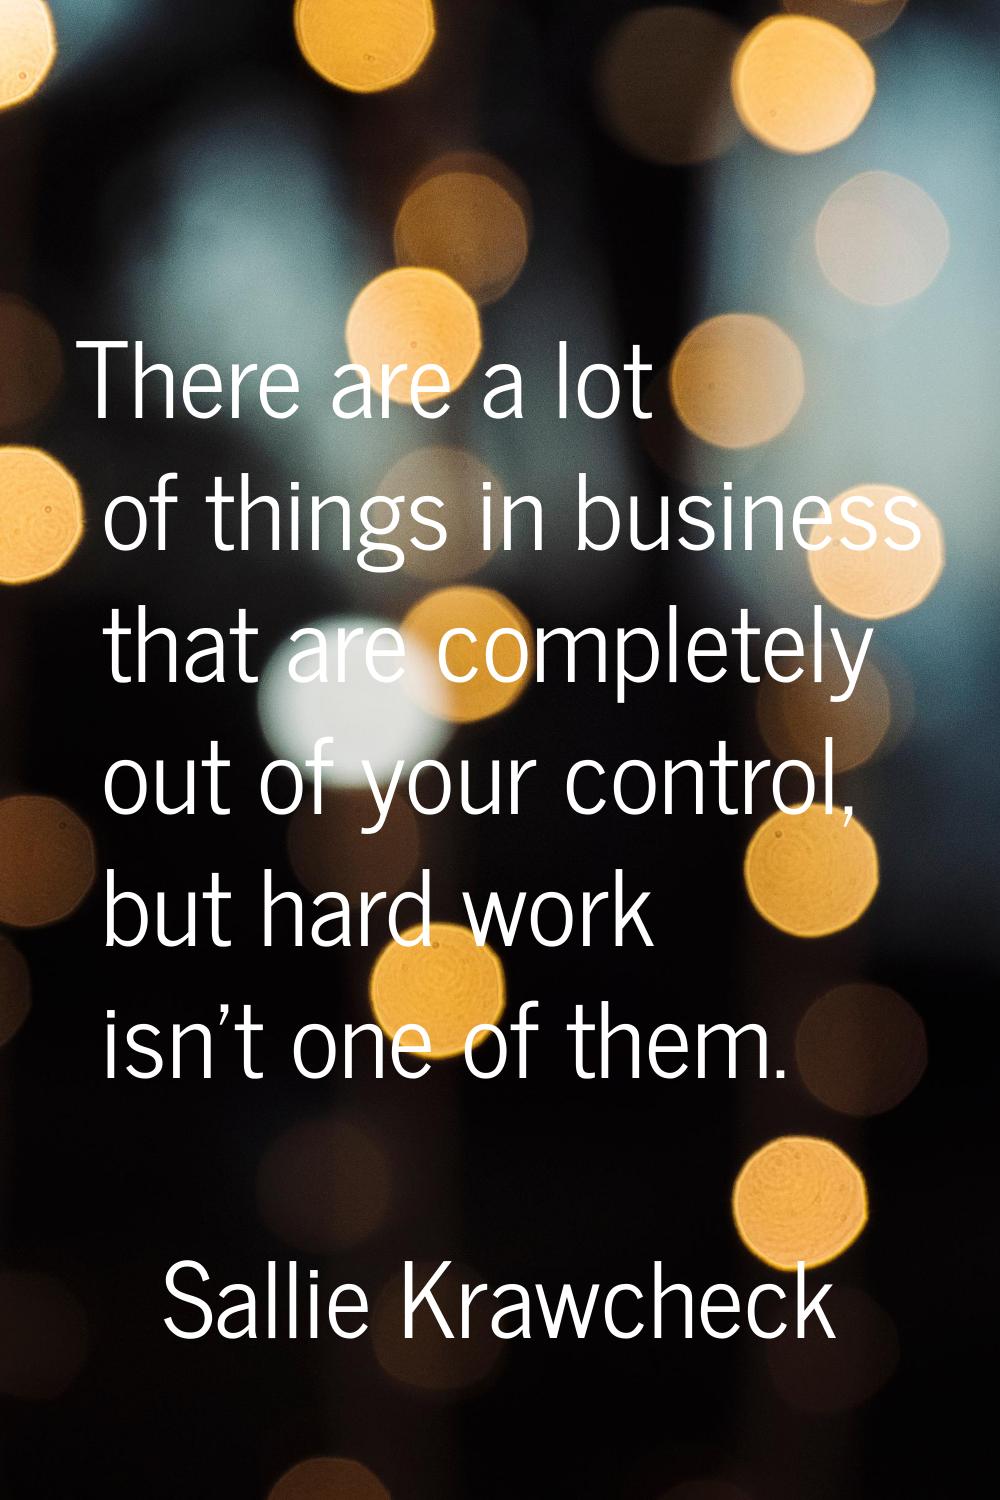 There are a lot of things in business that are completely out of your control, but hard work isn't 